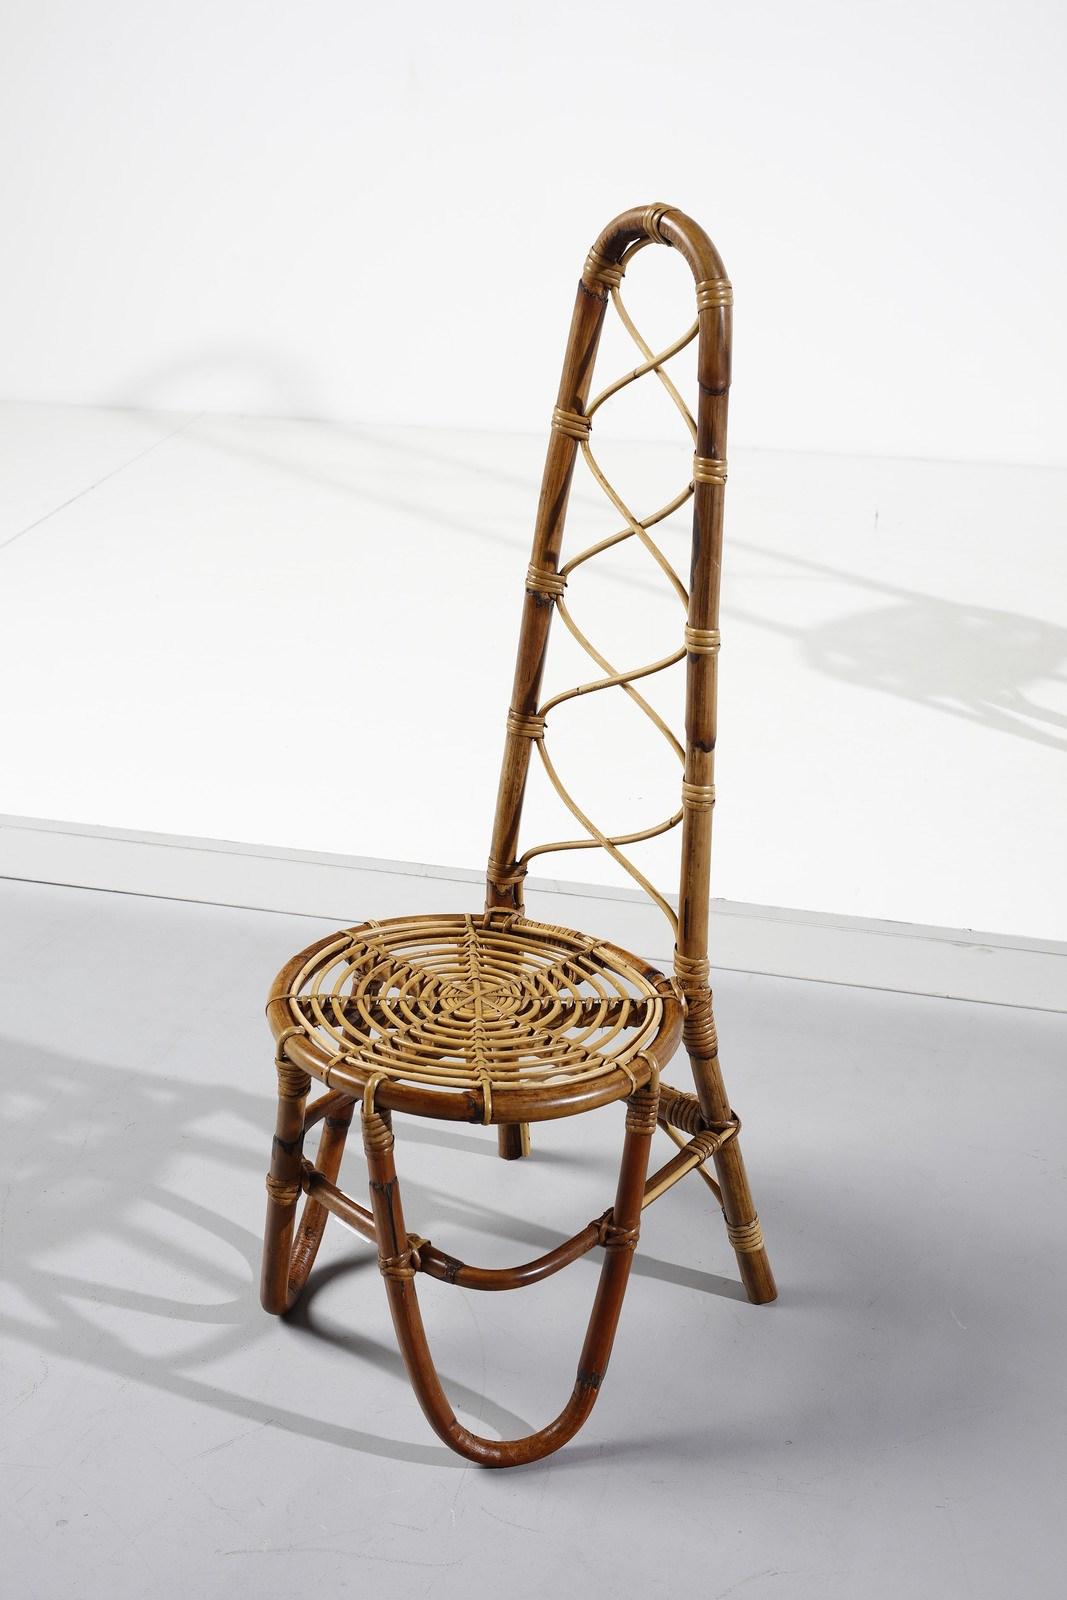 20th Century Sculptural Chair by Tito Agnoli Rattan and Bamboo, Italy, 1960 For Sale